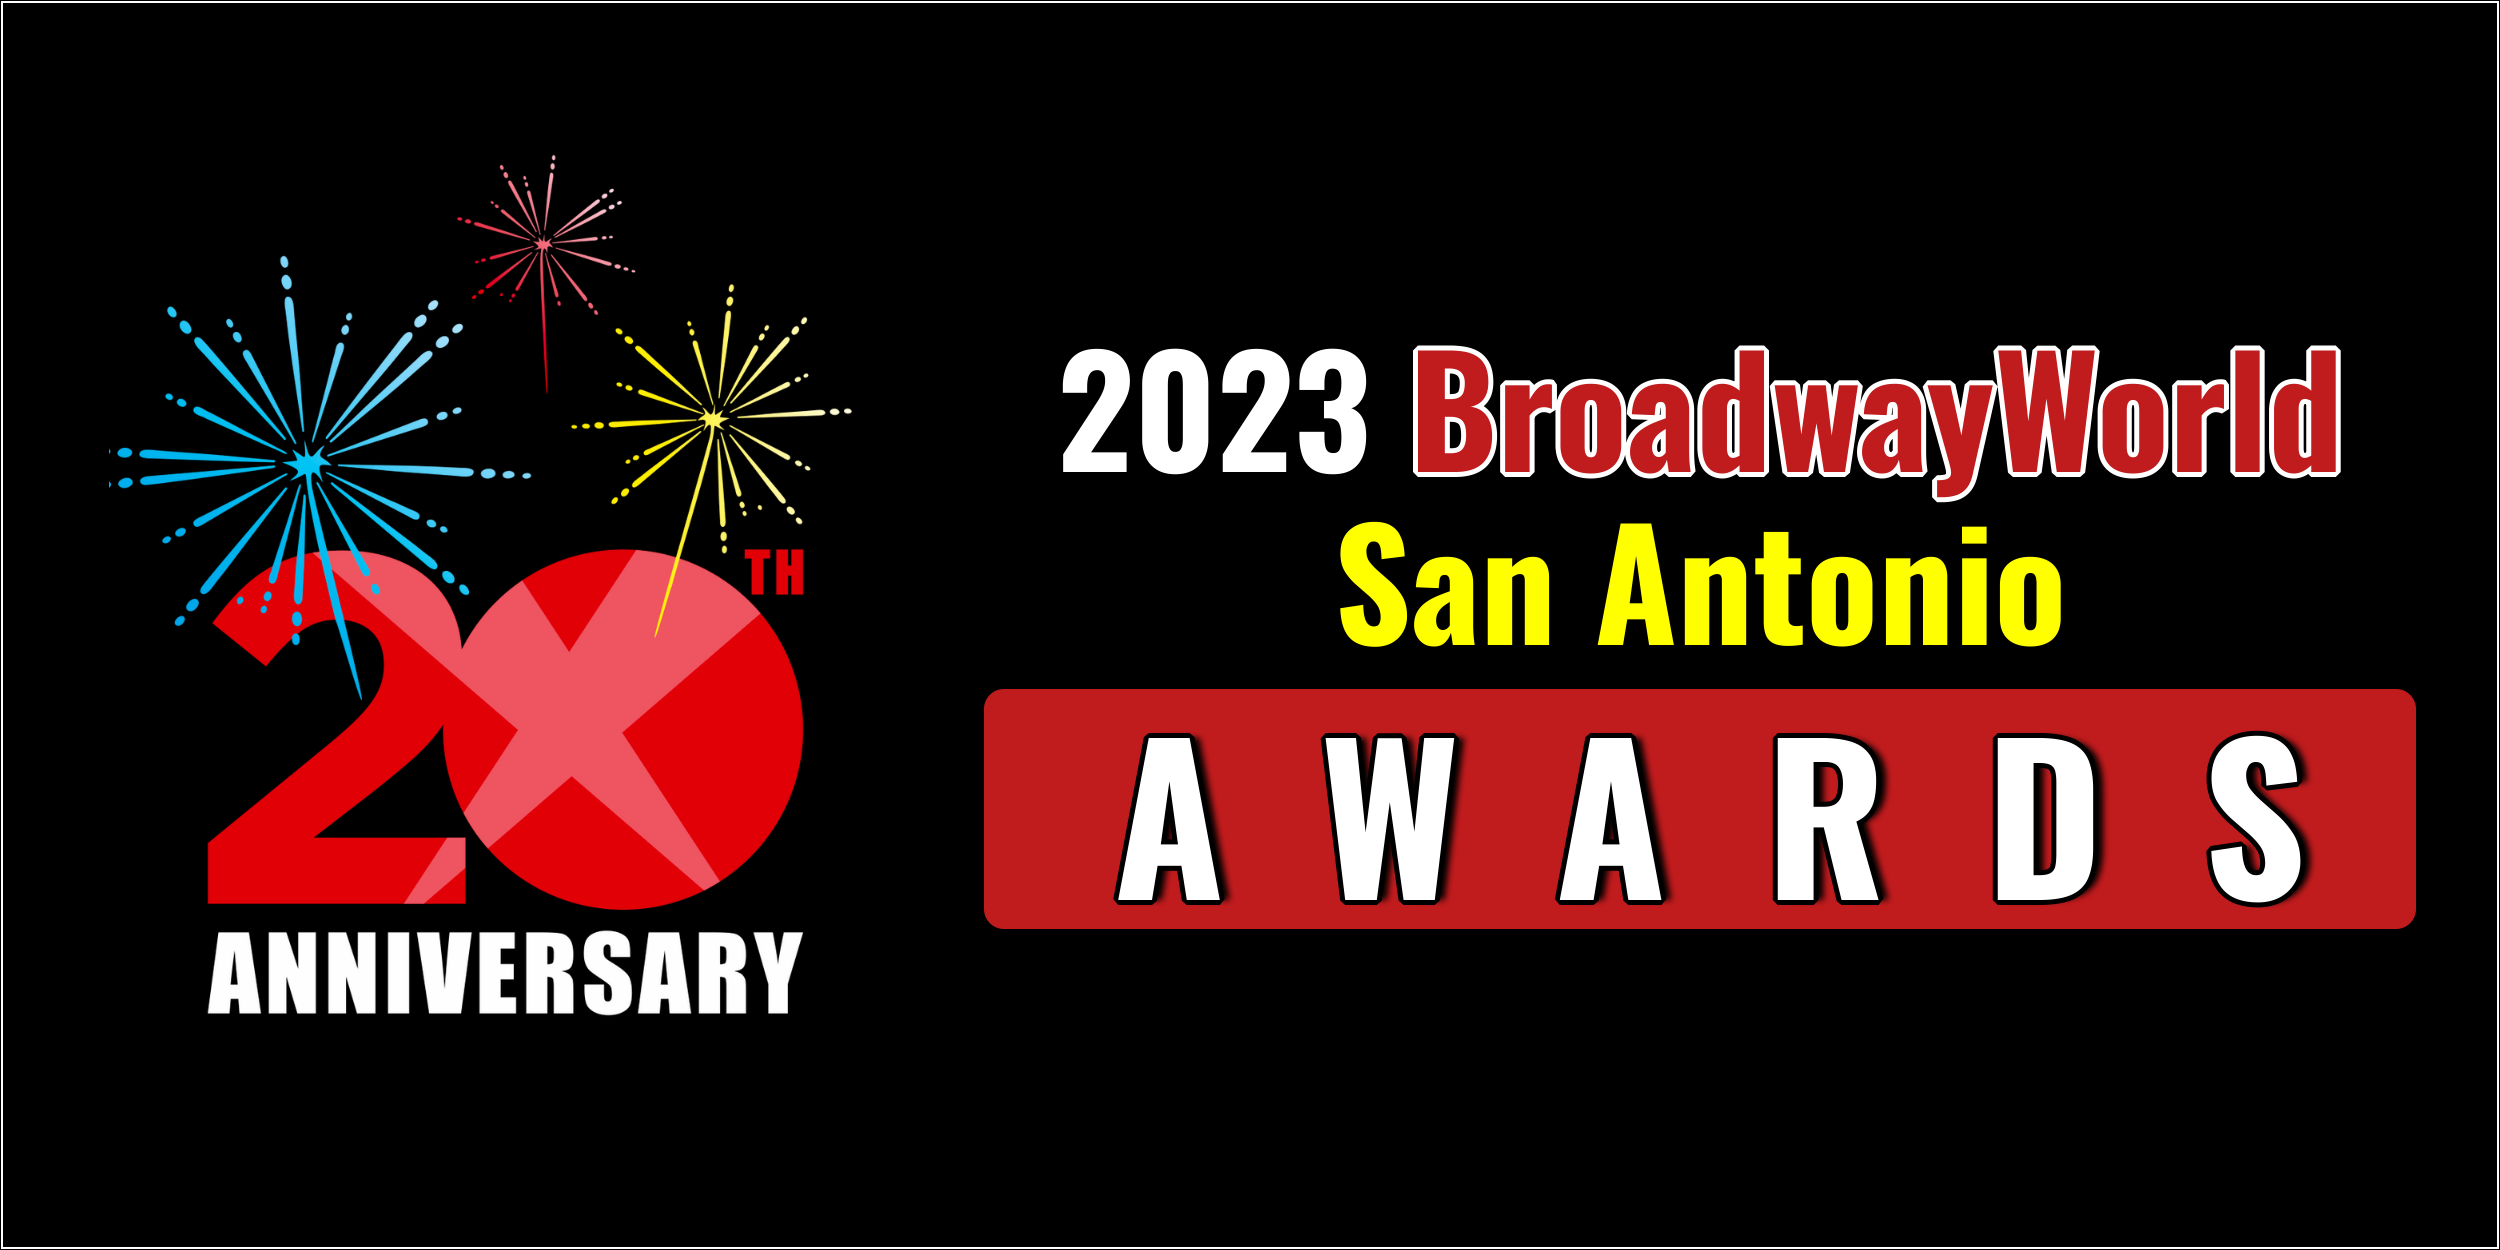 Latest Standings Announced For The 2023 BroadwayWorld San Antonio Awards; SOMEWHERE OVER THE BORDER Leads Best Musical! 